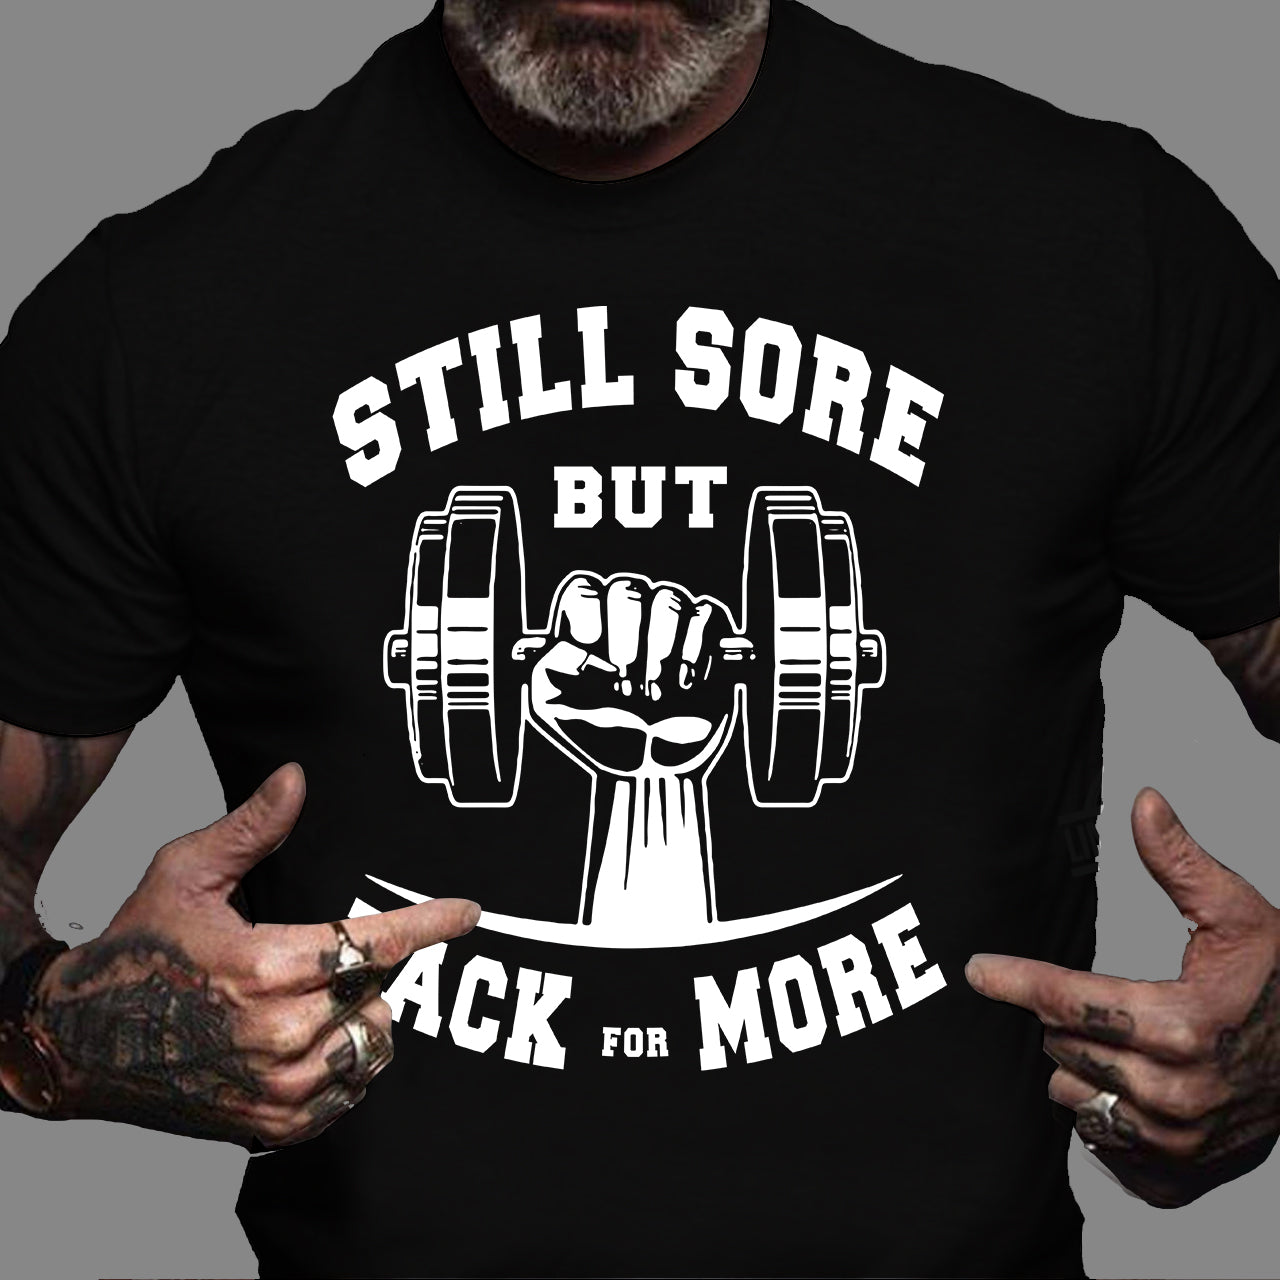 Gym T-shirts Quotes Bodybuilding Sore But Bakc and – Style Pride